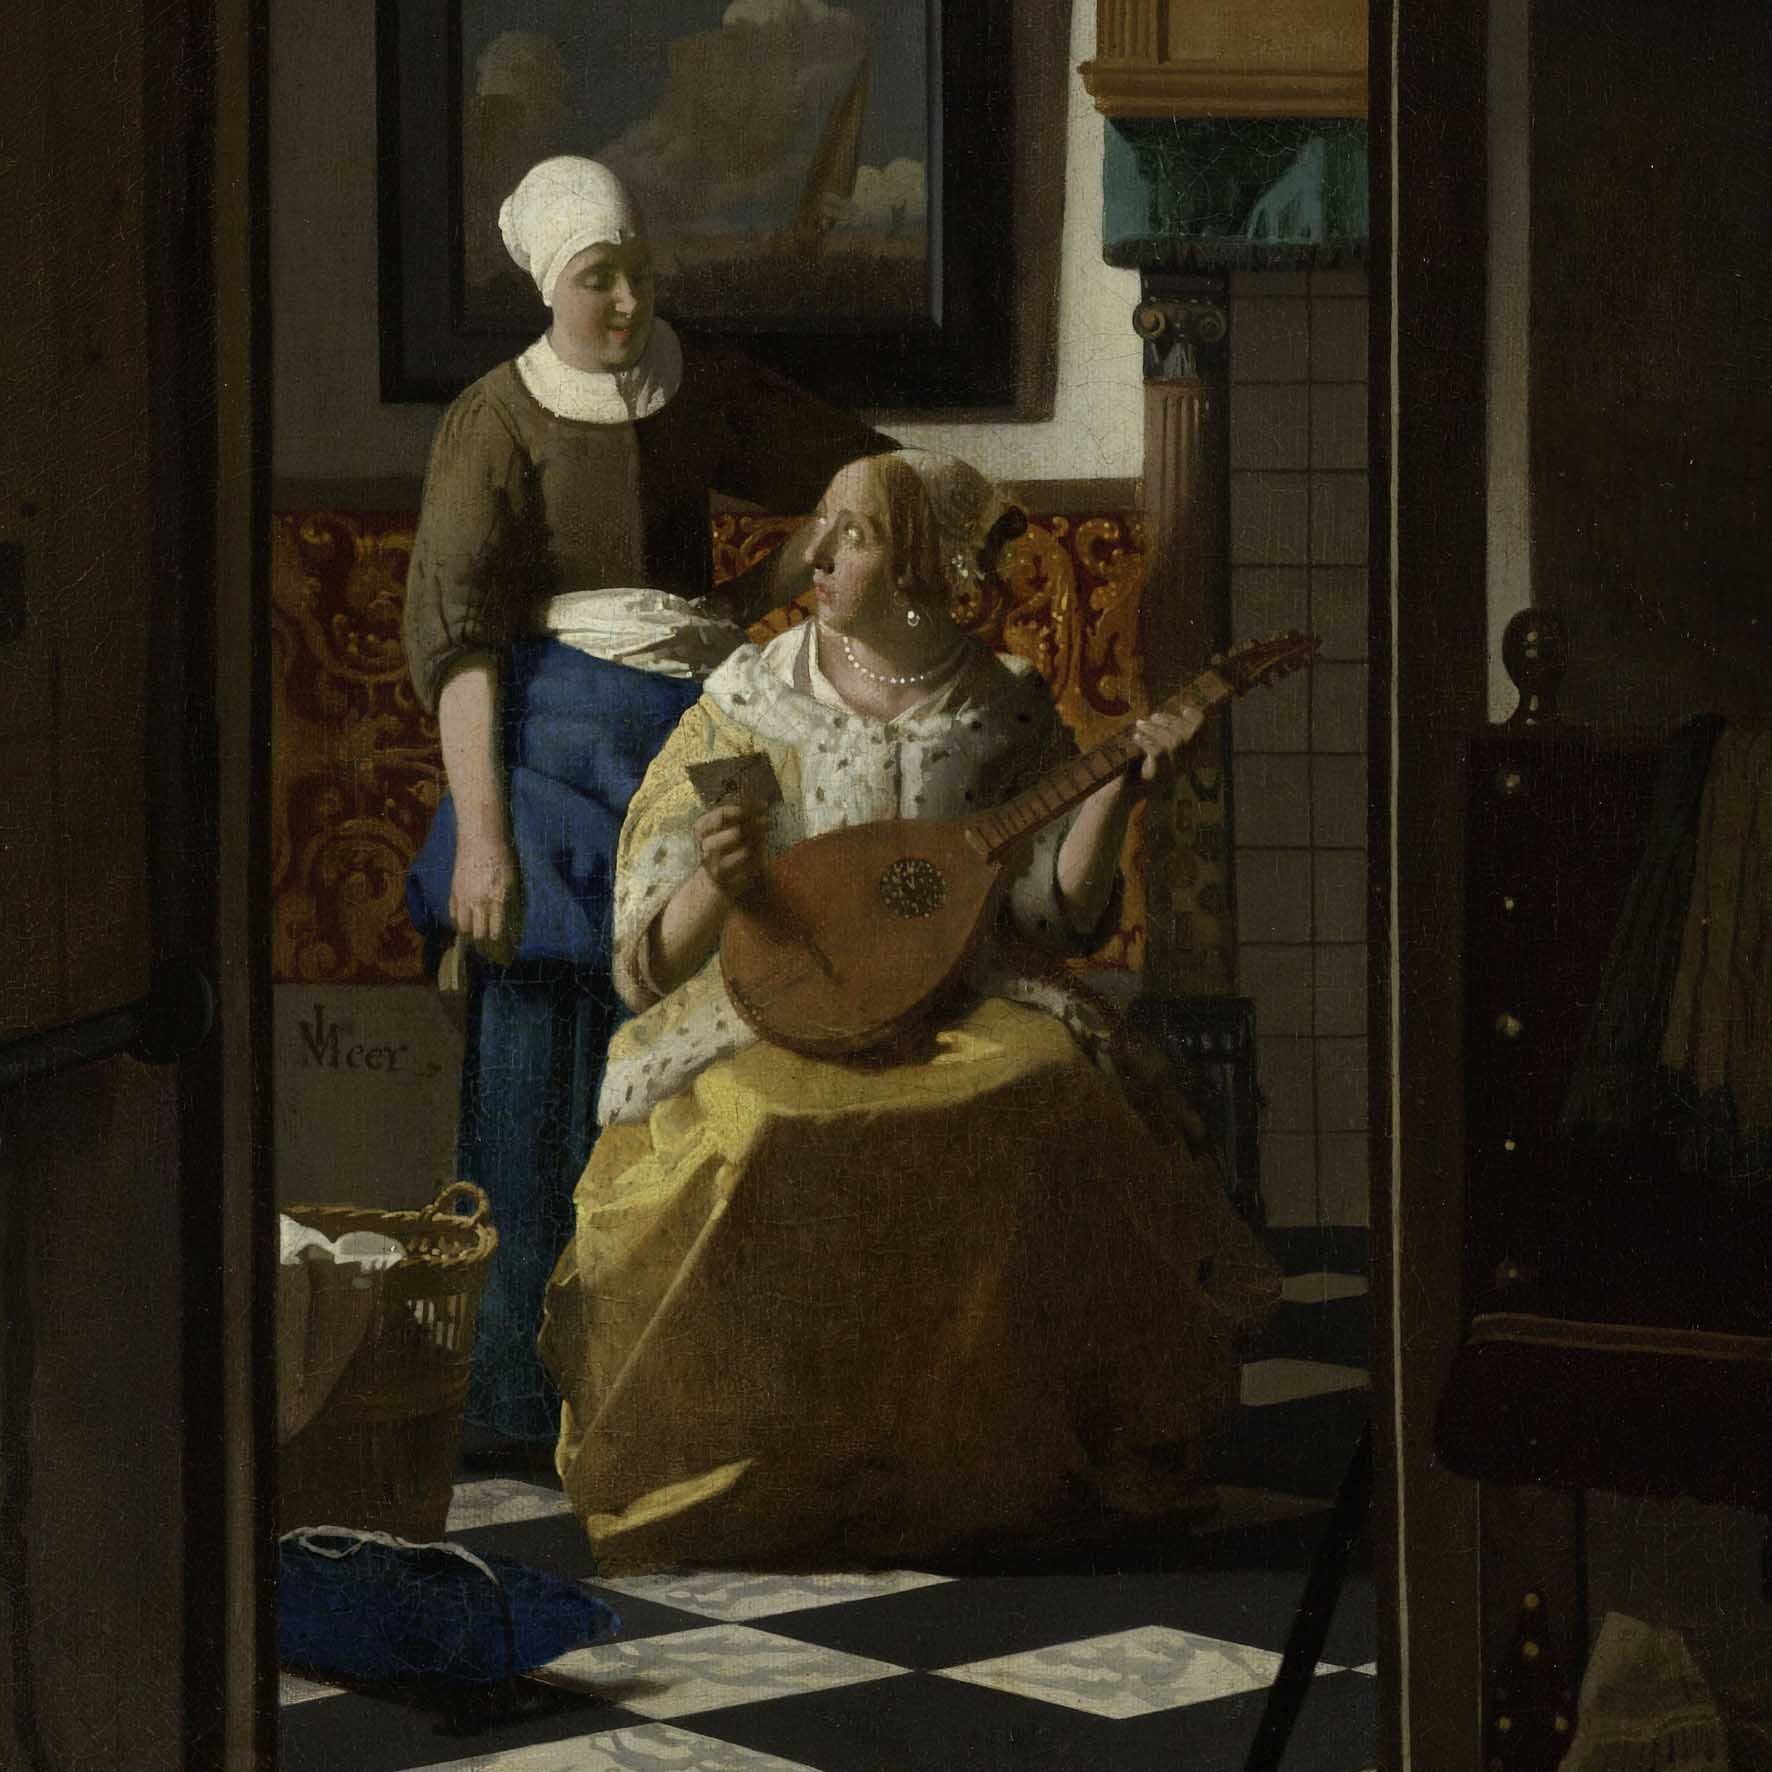 The love letter by Vermeer